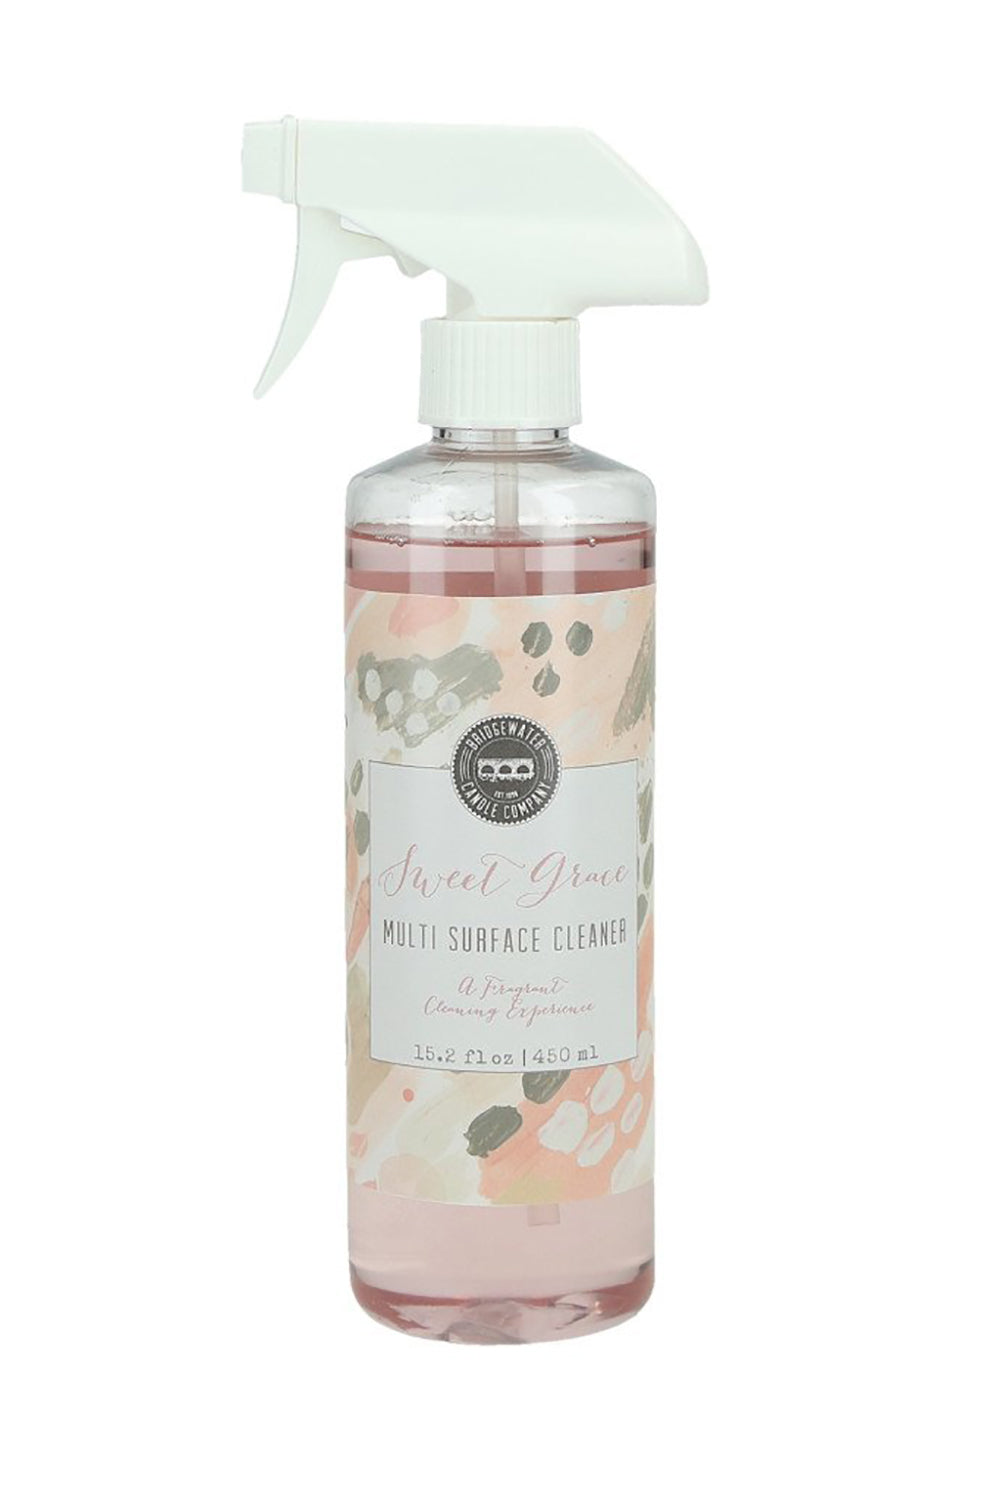 Bridgewater Candle Co: Multi Surface Cleaner - Sweet Grace